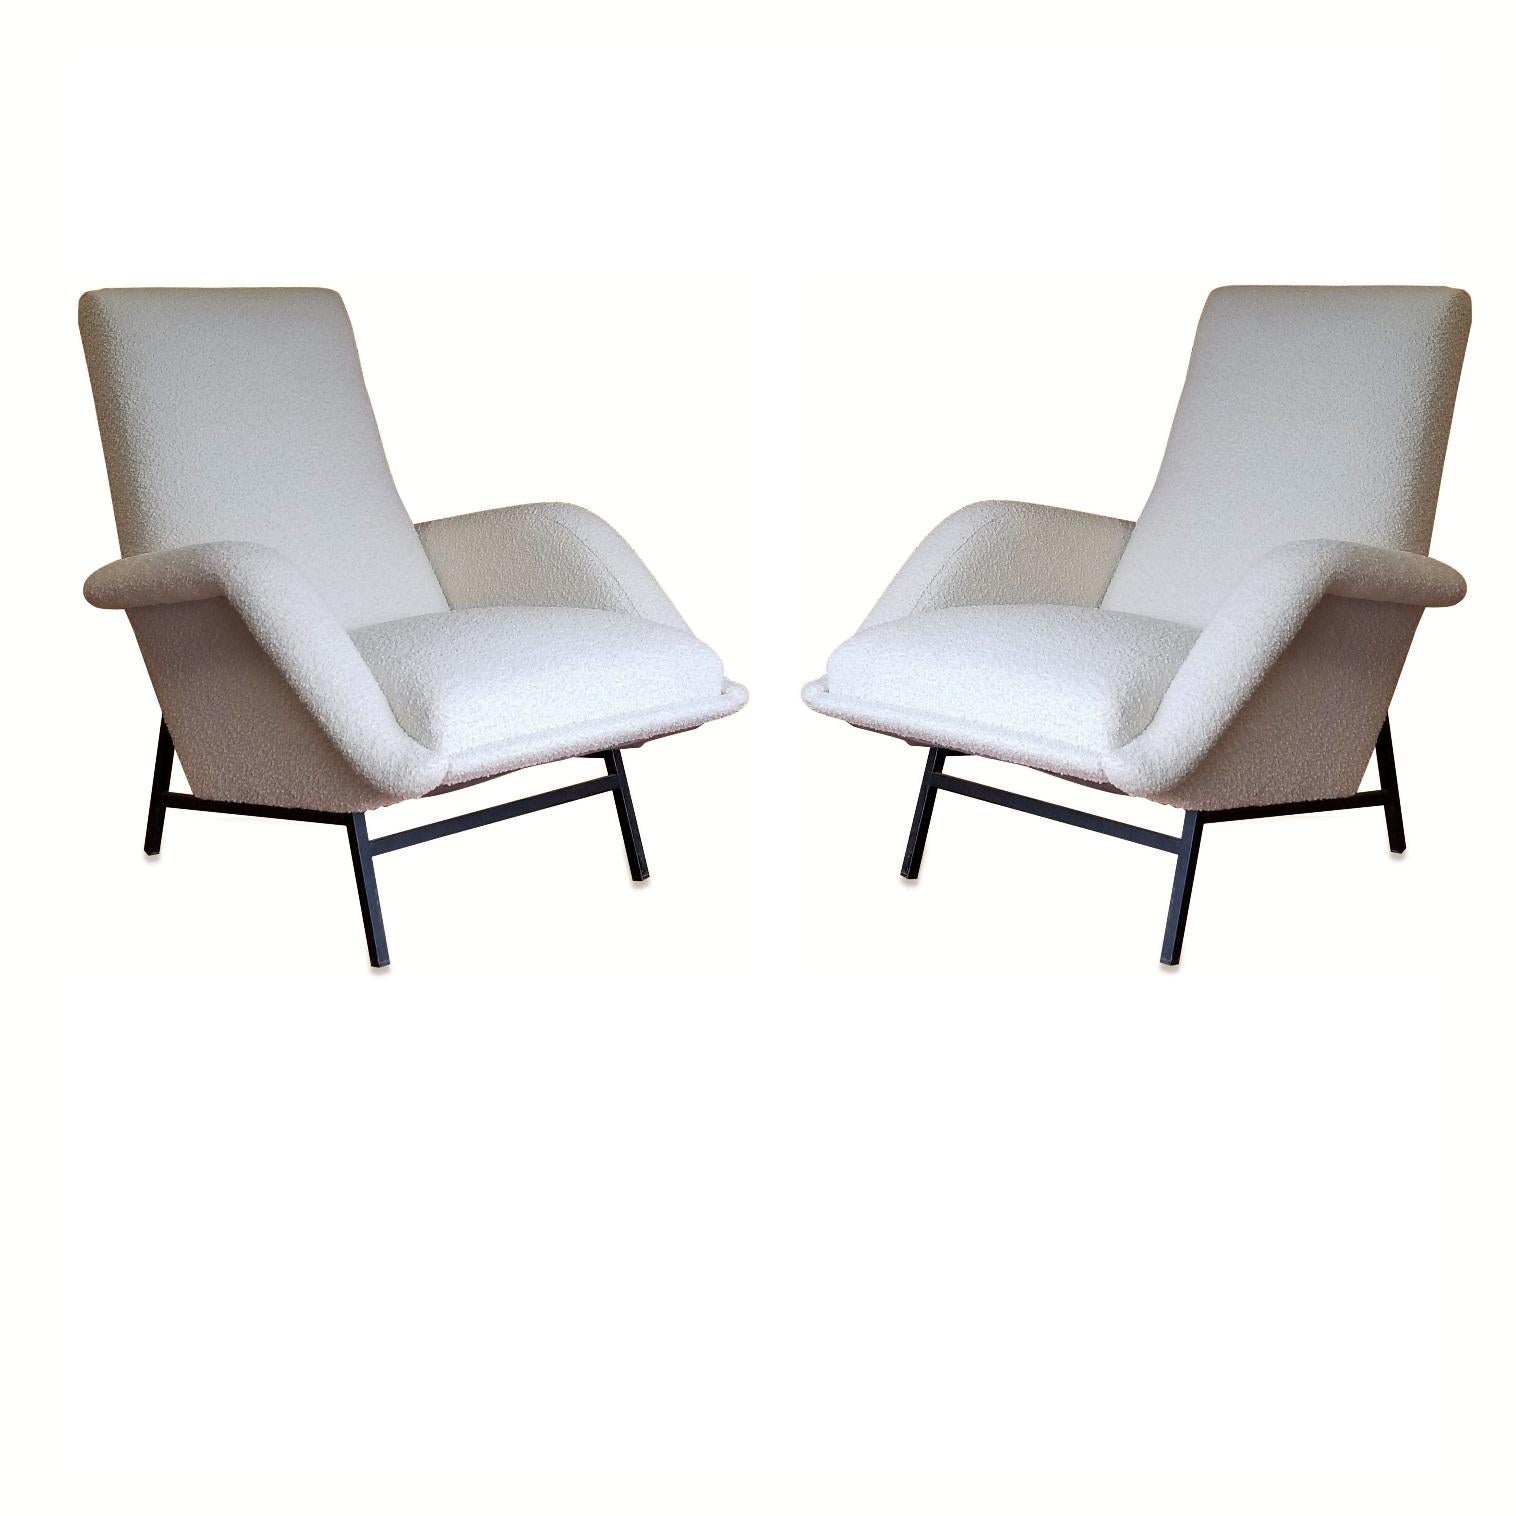 Freshly re-upholstered in Bisson Bruneel Crème Bergame fabric
Edition Claude Delor, 1955
These armchairs will ship from France
They can be returned to either France or NY, USA location
Price does not include shipping nor possible customs related